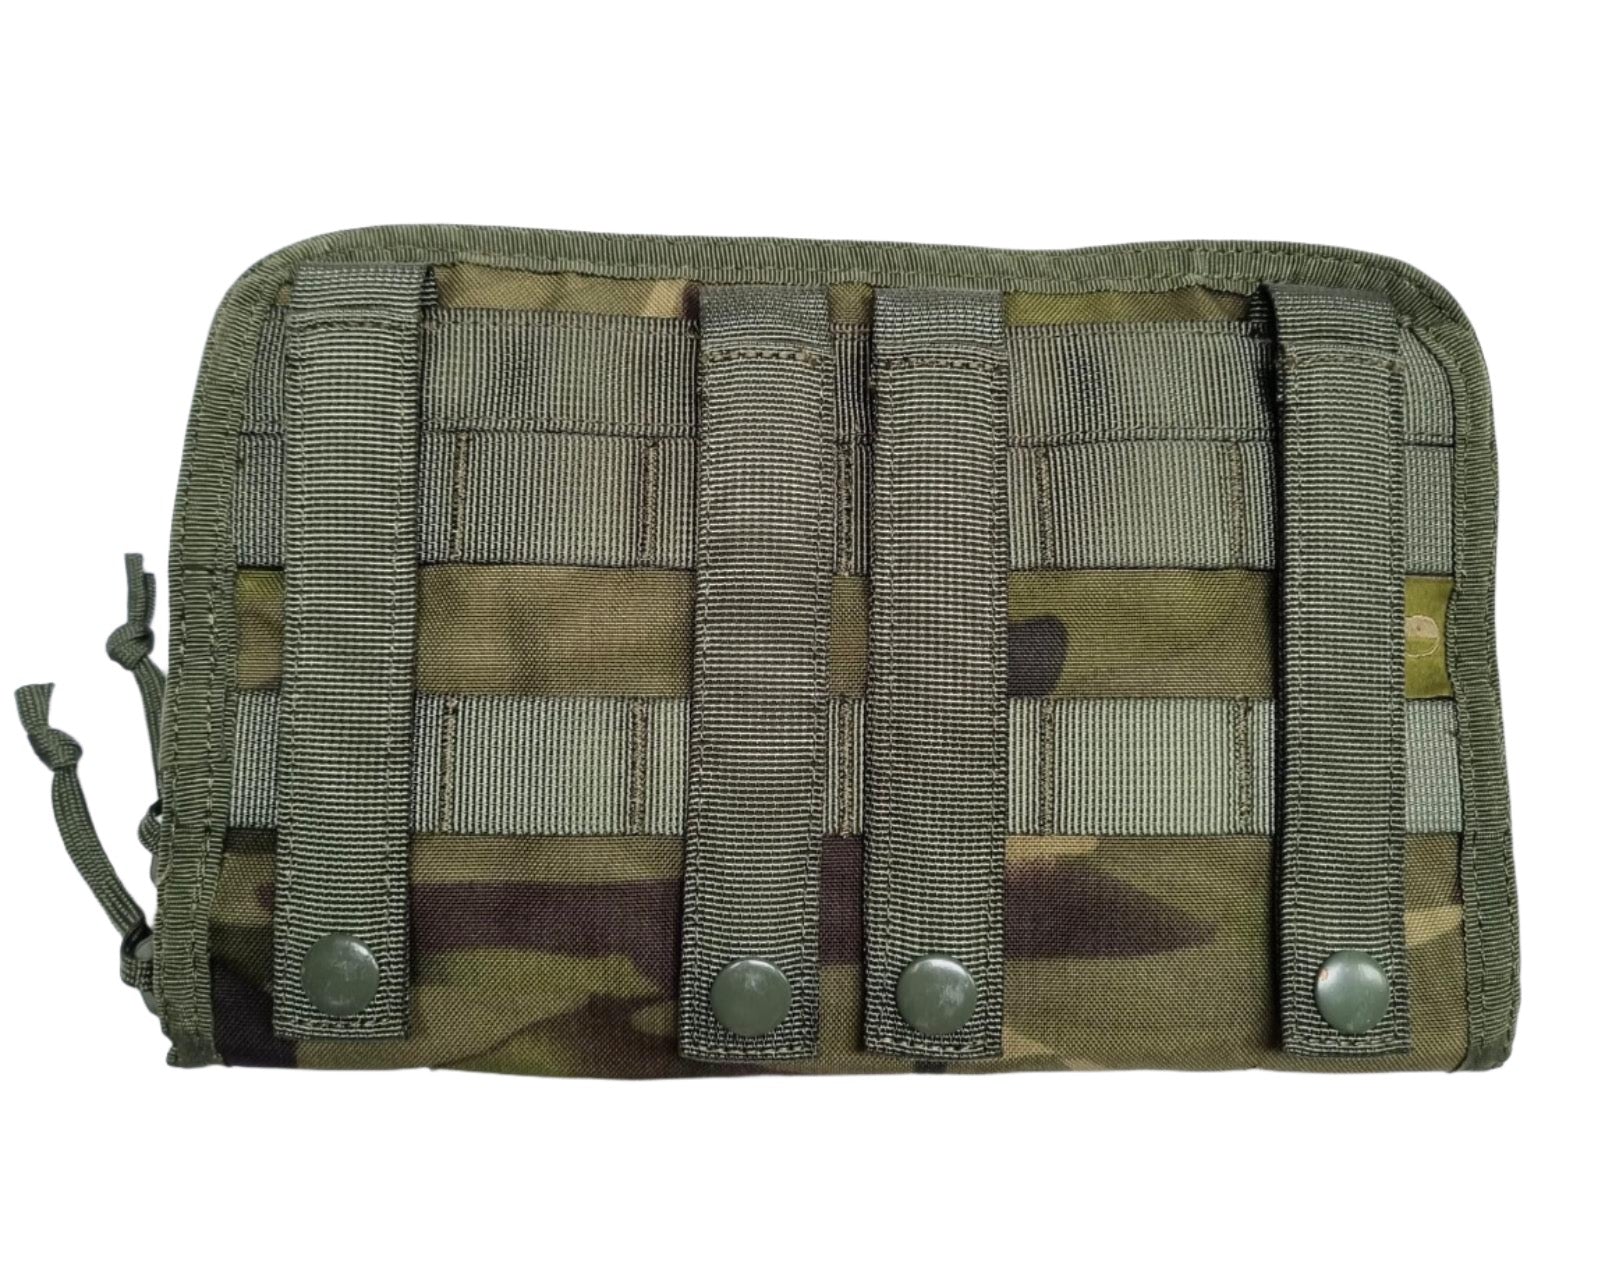 SHE-1044 COMMANDER PANEL / MAP POUCH COLOUR UTP TEMPERATE